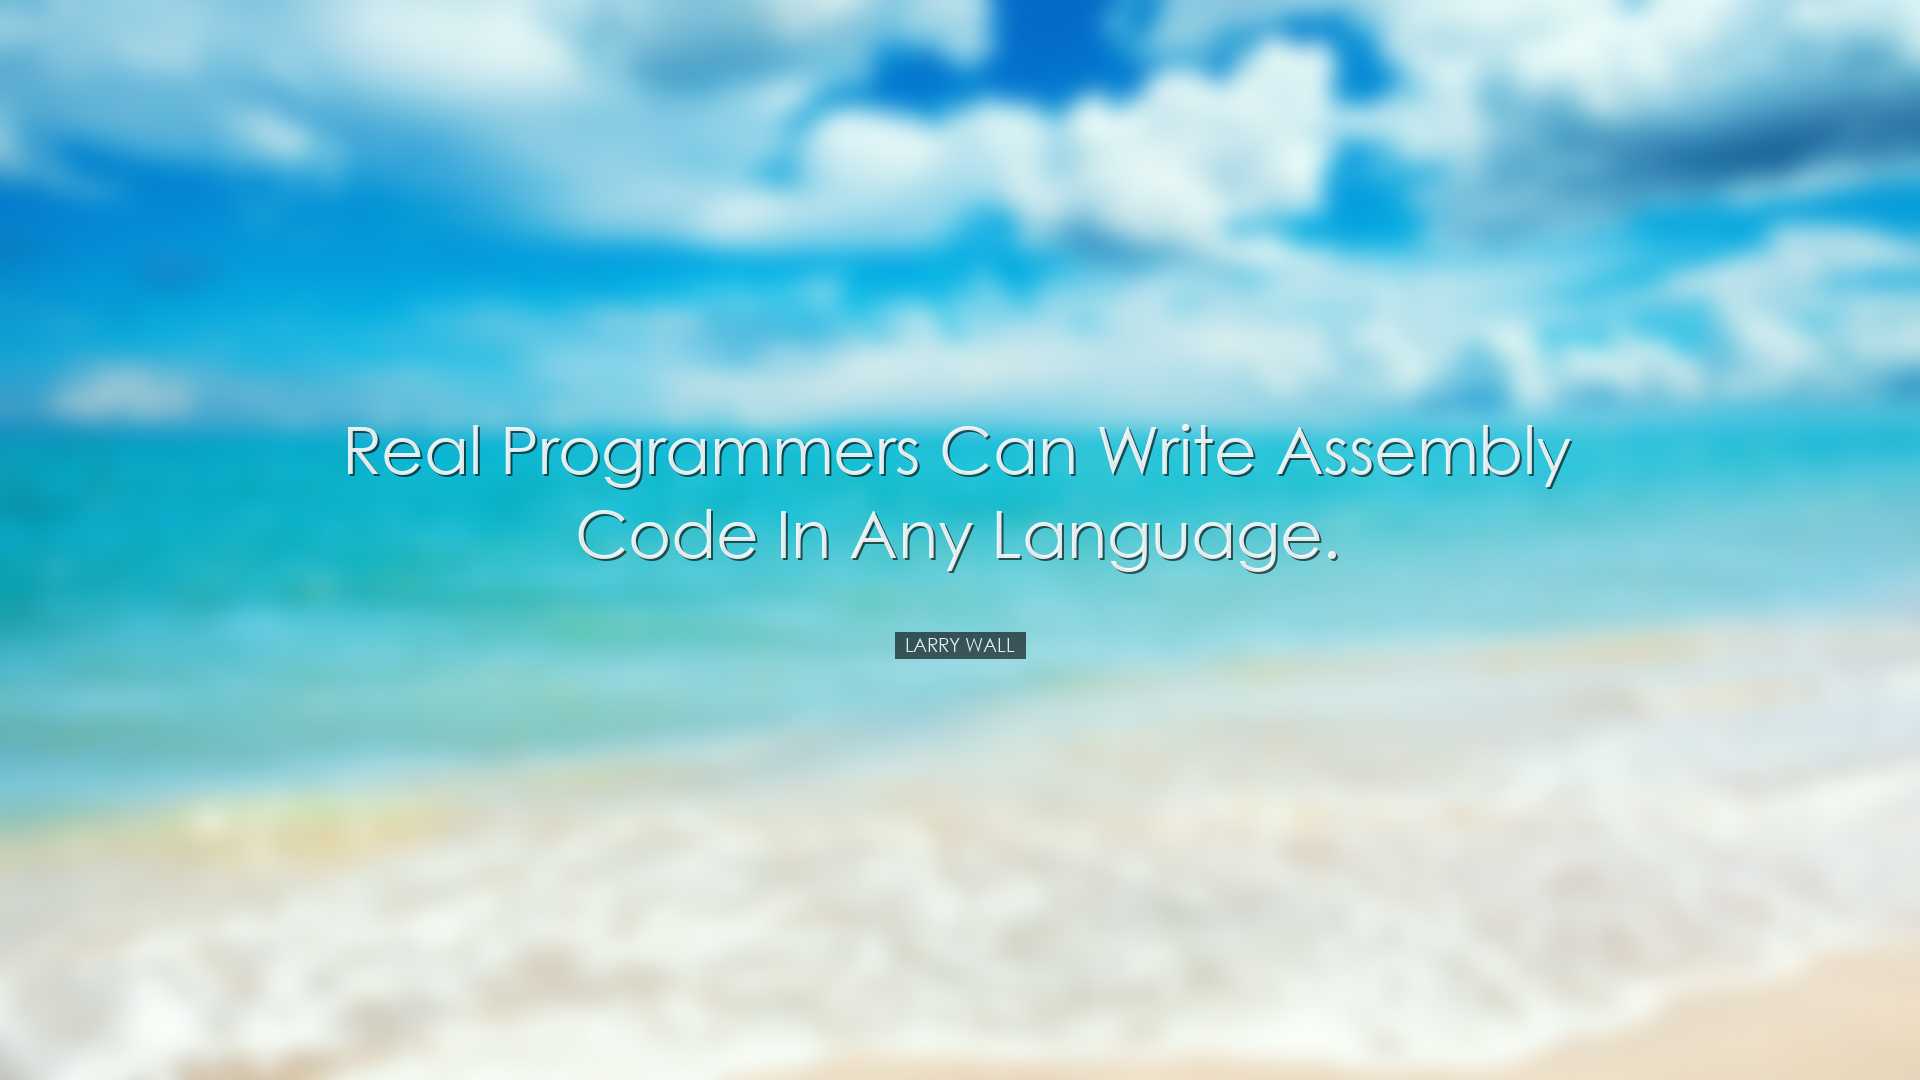 Real programmers can write assembly code in any language. - Larry